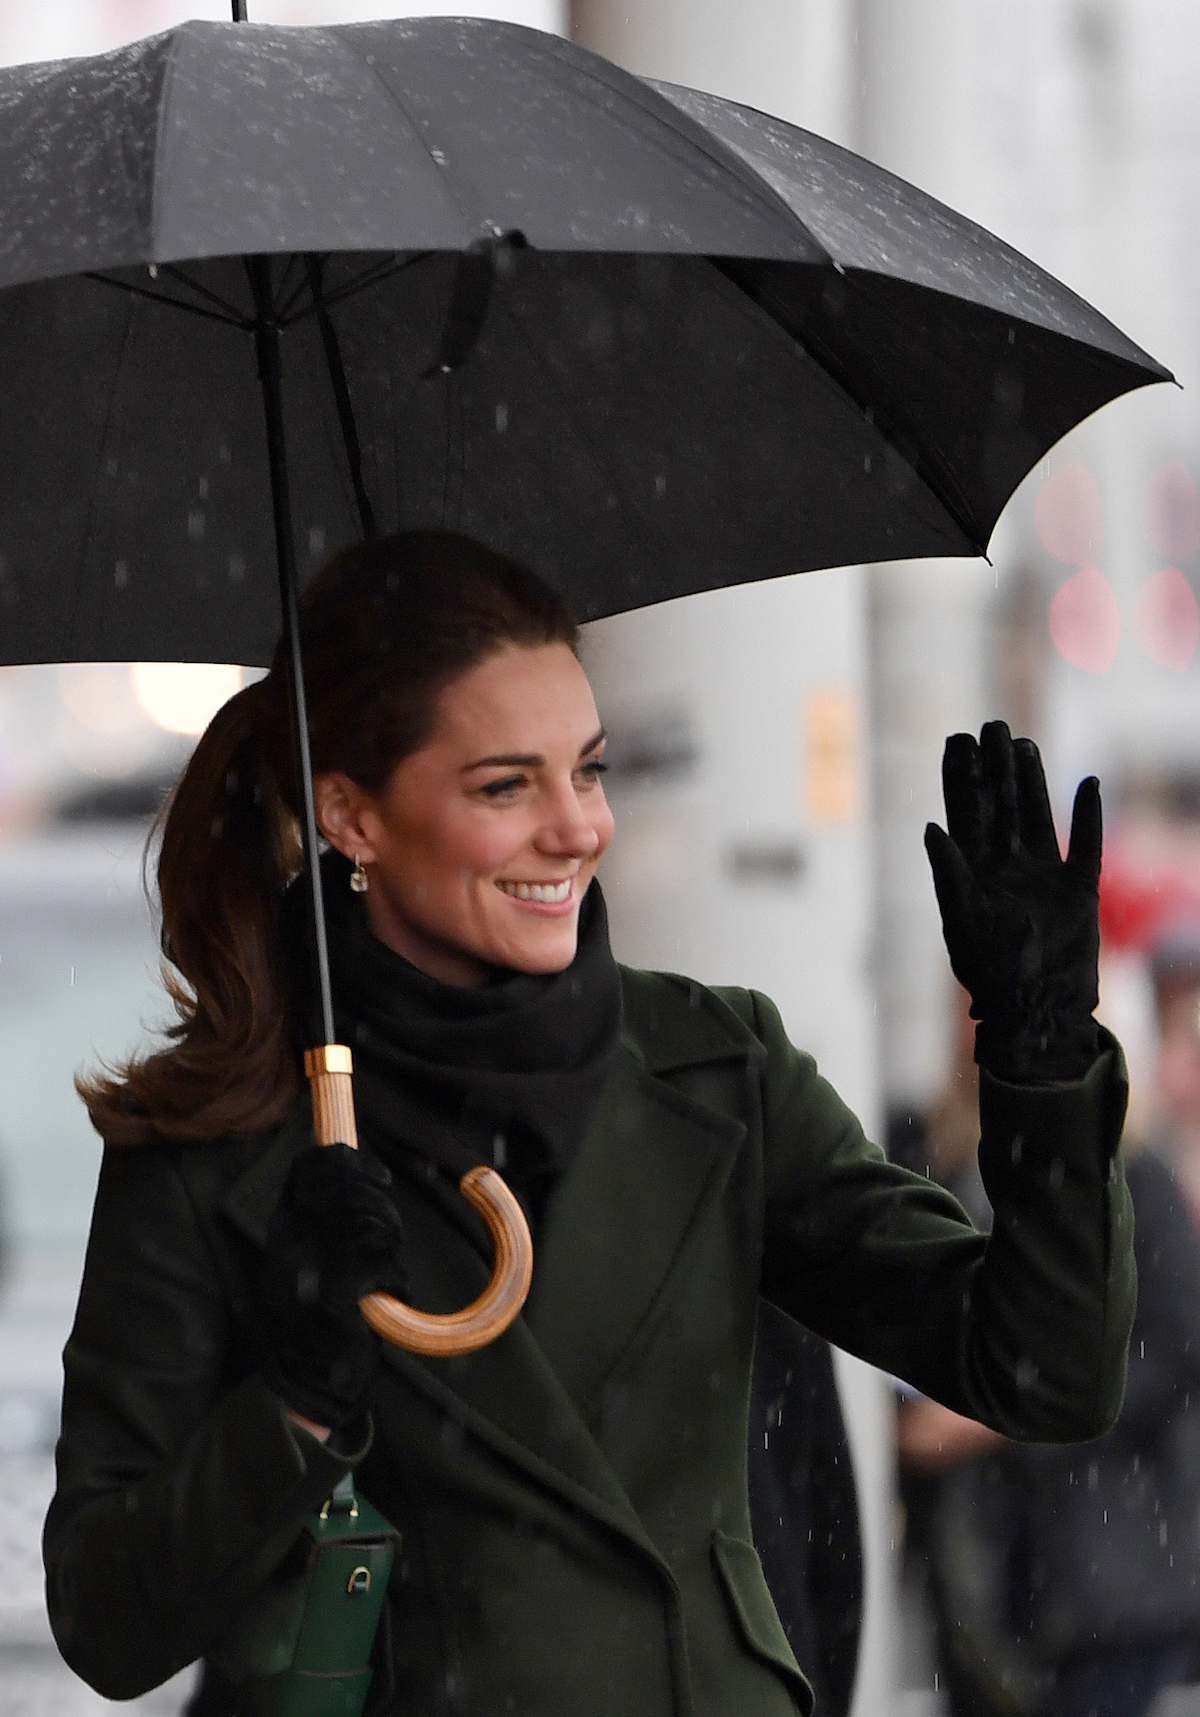 Britain's Catherine, Duchess of Cambridge shelters from the rain beneath an umbrella as she arrives to visit Blackpool Tower in Blackpool, north-west England on March 6, 2019. (Photo credit: PAUL ELLIS/AFP/Getty Images)